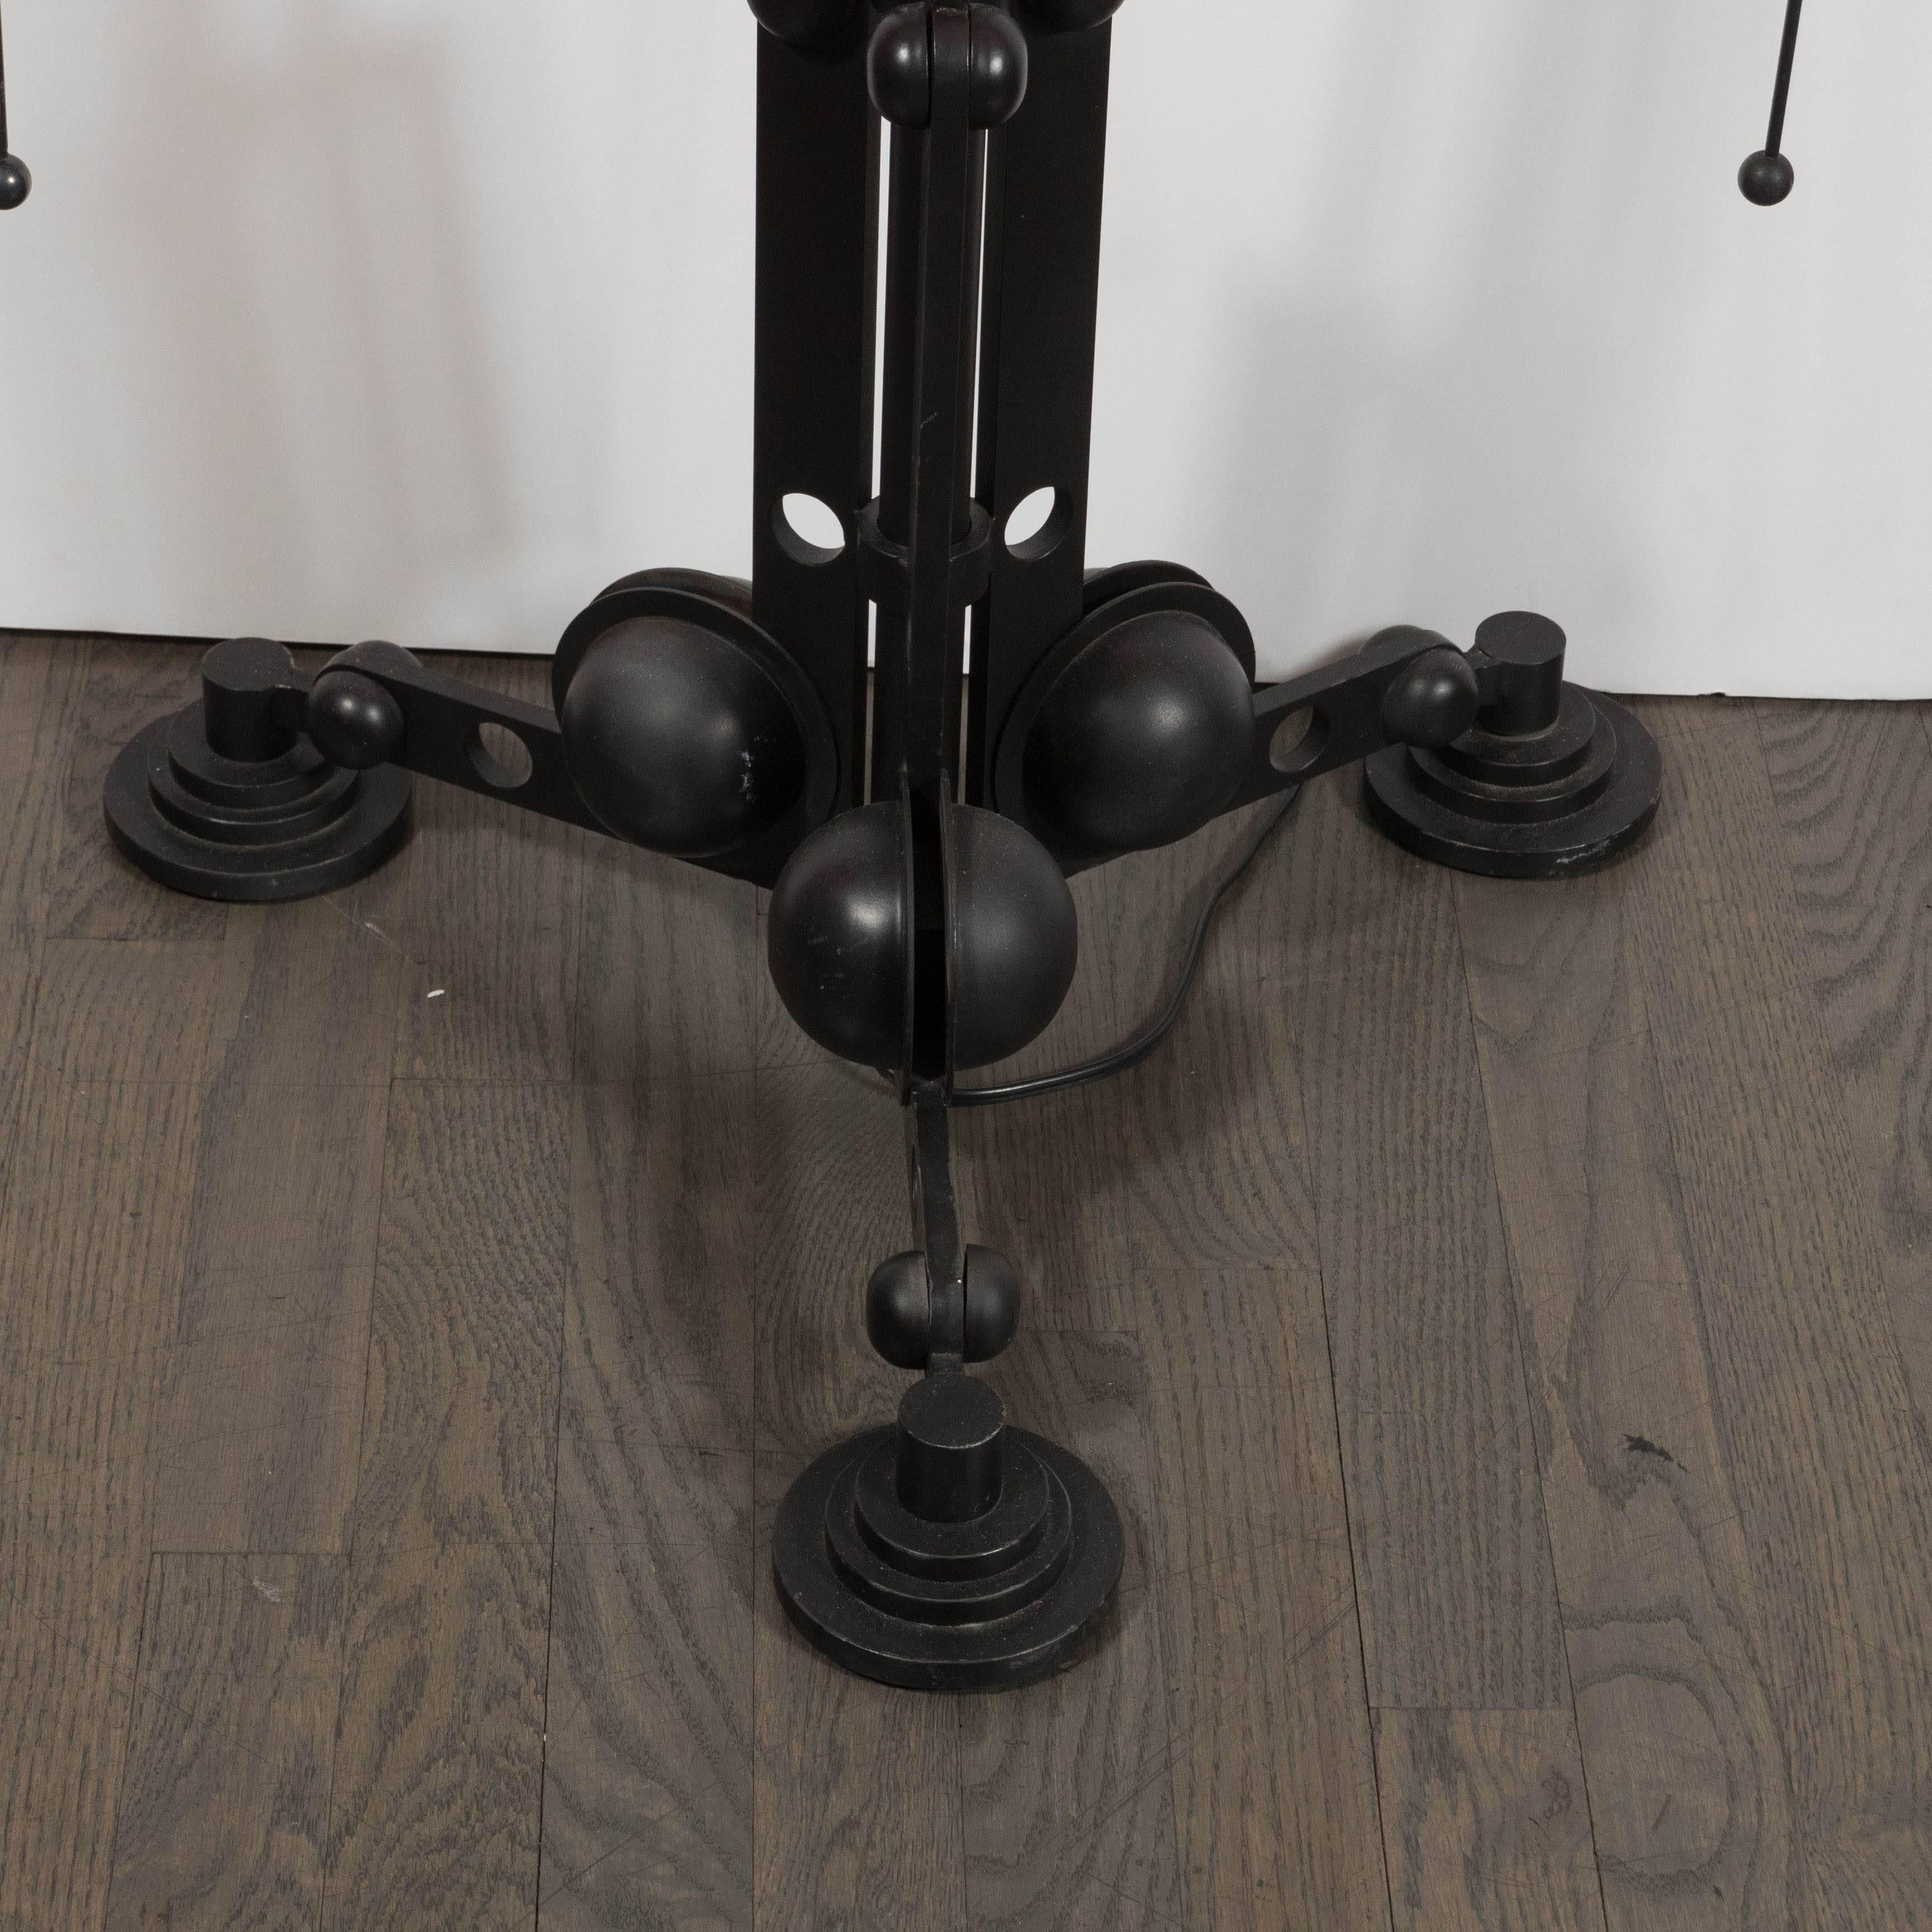 Italian Pair of Structural Memphis Industrial Style Floor Lamps with Murano Glass Discs